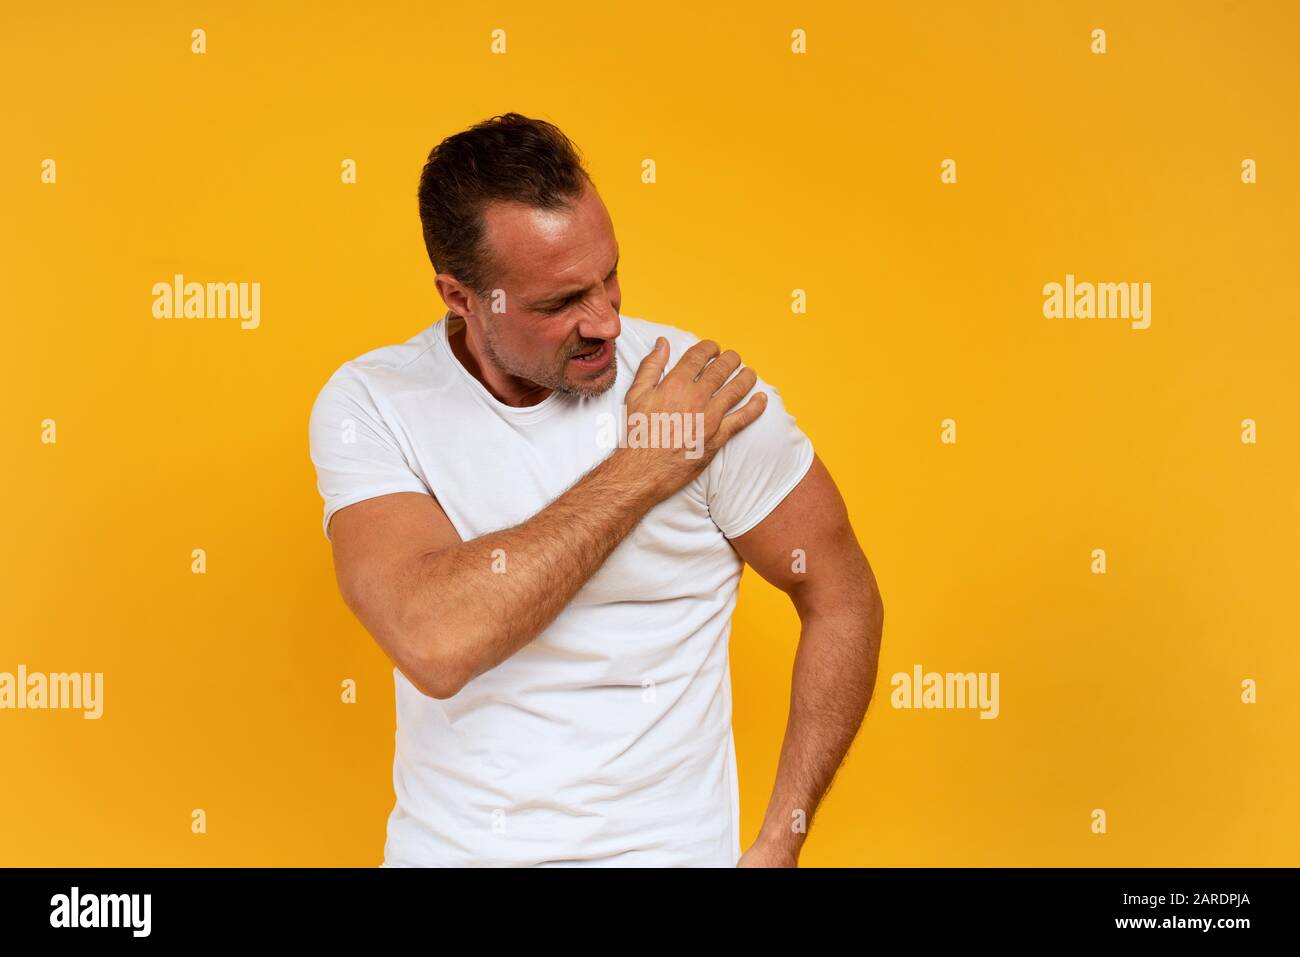 Aching man with back pain. Yellow background Stock Photo